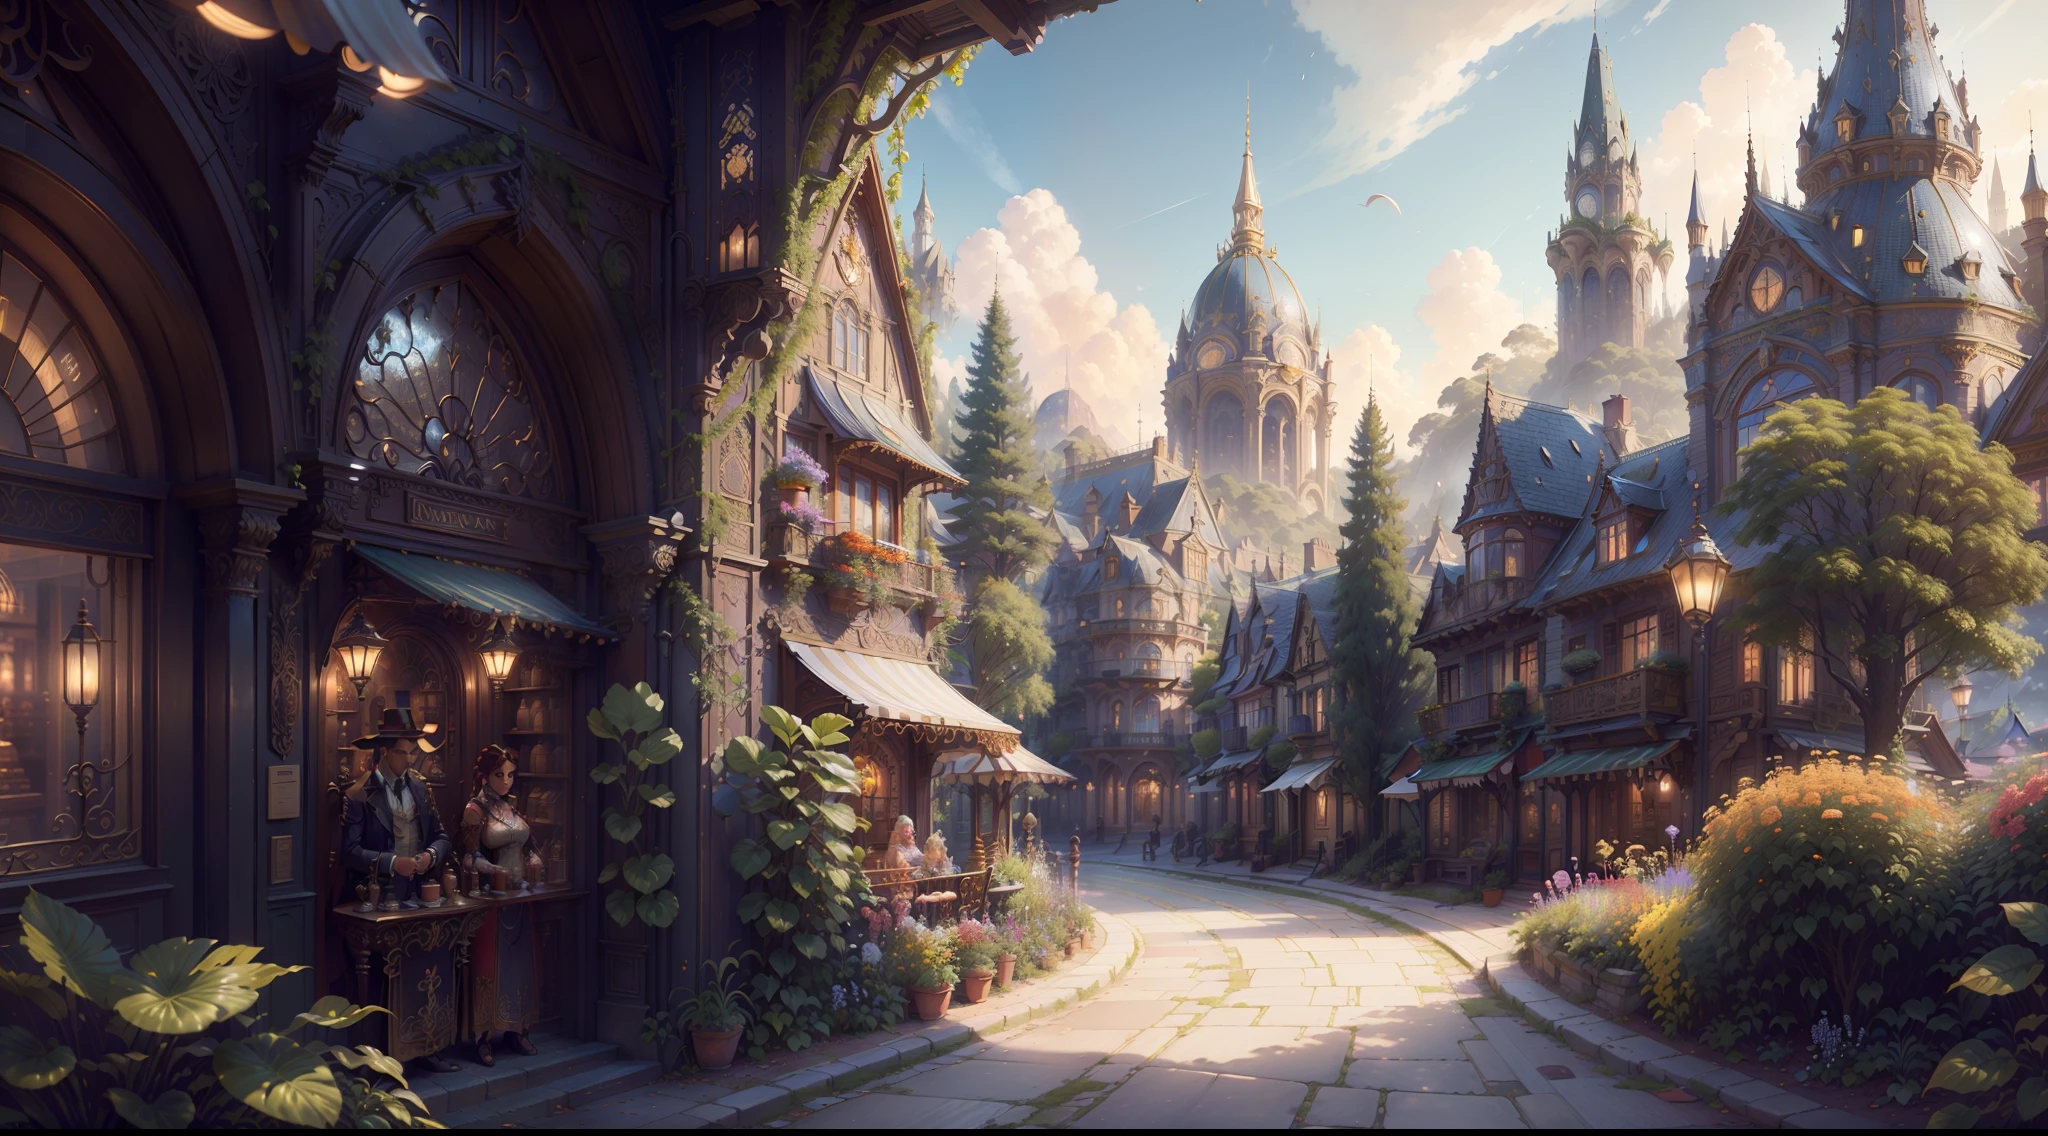 "picturesque townscape: breathtaking architecture in Art Nouveau style, ((paved street)), (beautiful cafe in the background: 0.5), ((magic shops: 0.5)); town square, charming, vibrant cityscape, [cars] enchanting magical fantasy ambiance, (masterpiece), (best quality), (ultra-detailed) beautiful surroundings in the background, many flowers and trees, insanely detailed and intricate, hypermaximalist, elegant, ornate, hyper realistic, super detailed, Cinematic Lighting, Wide Angle, scenery"